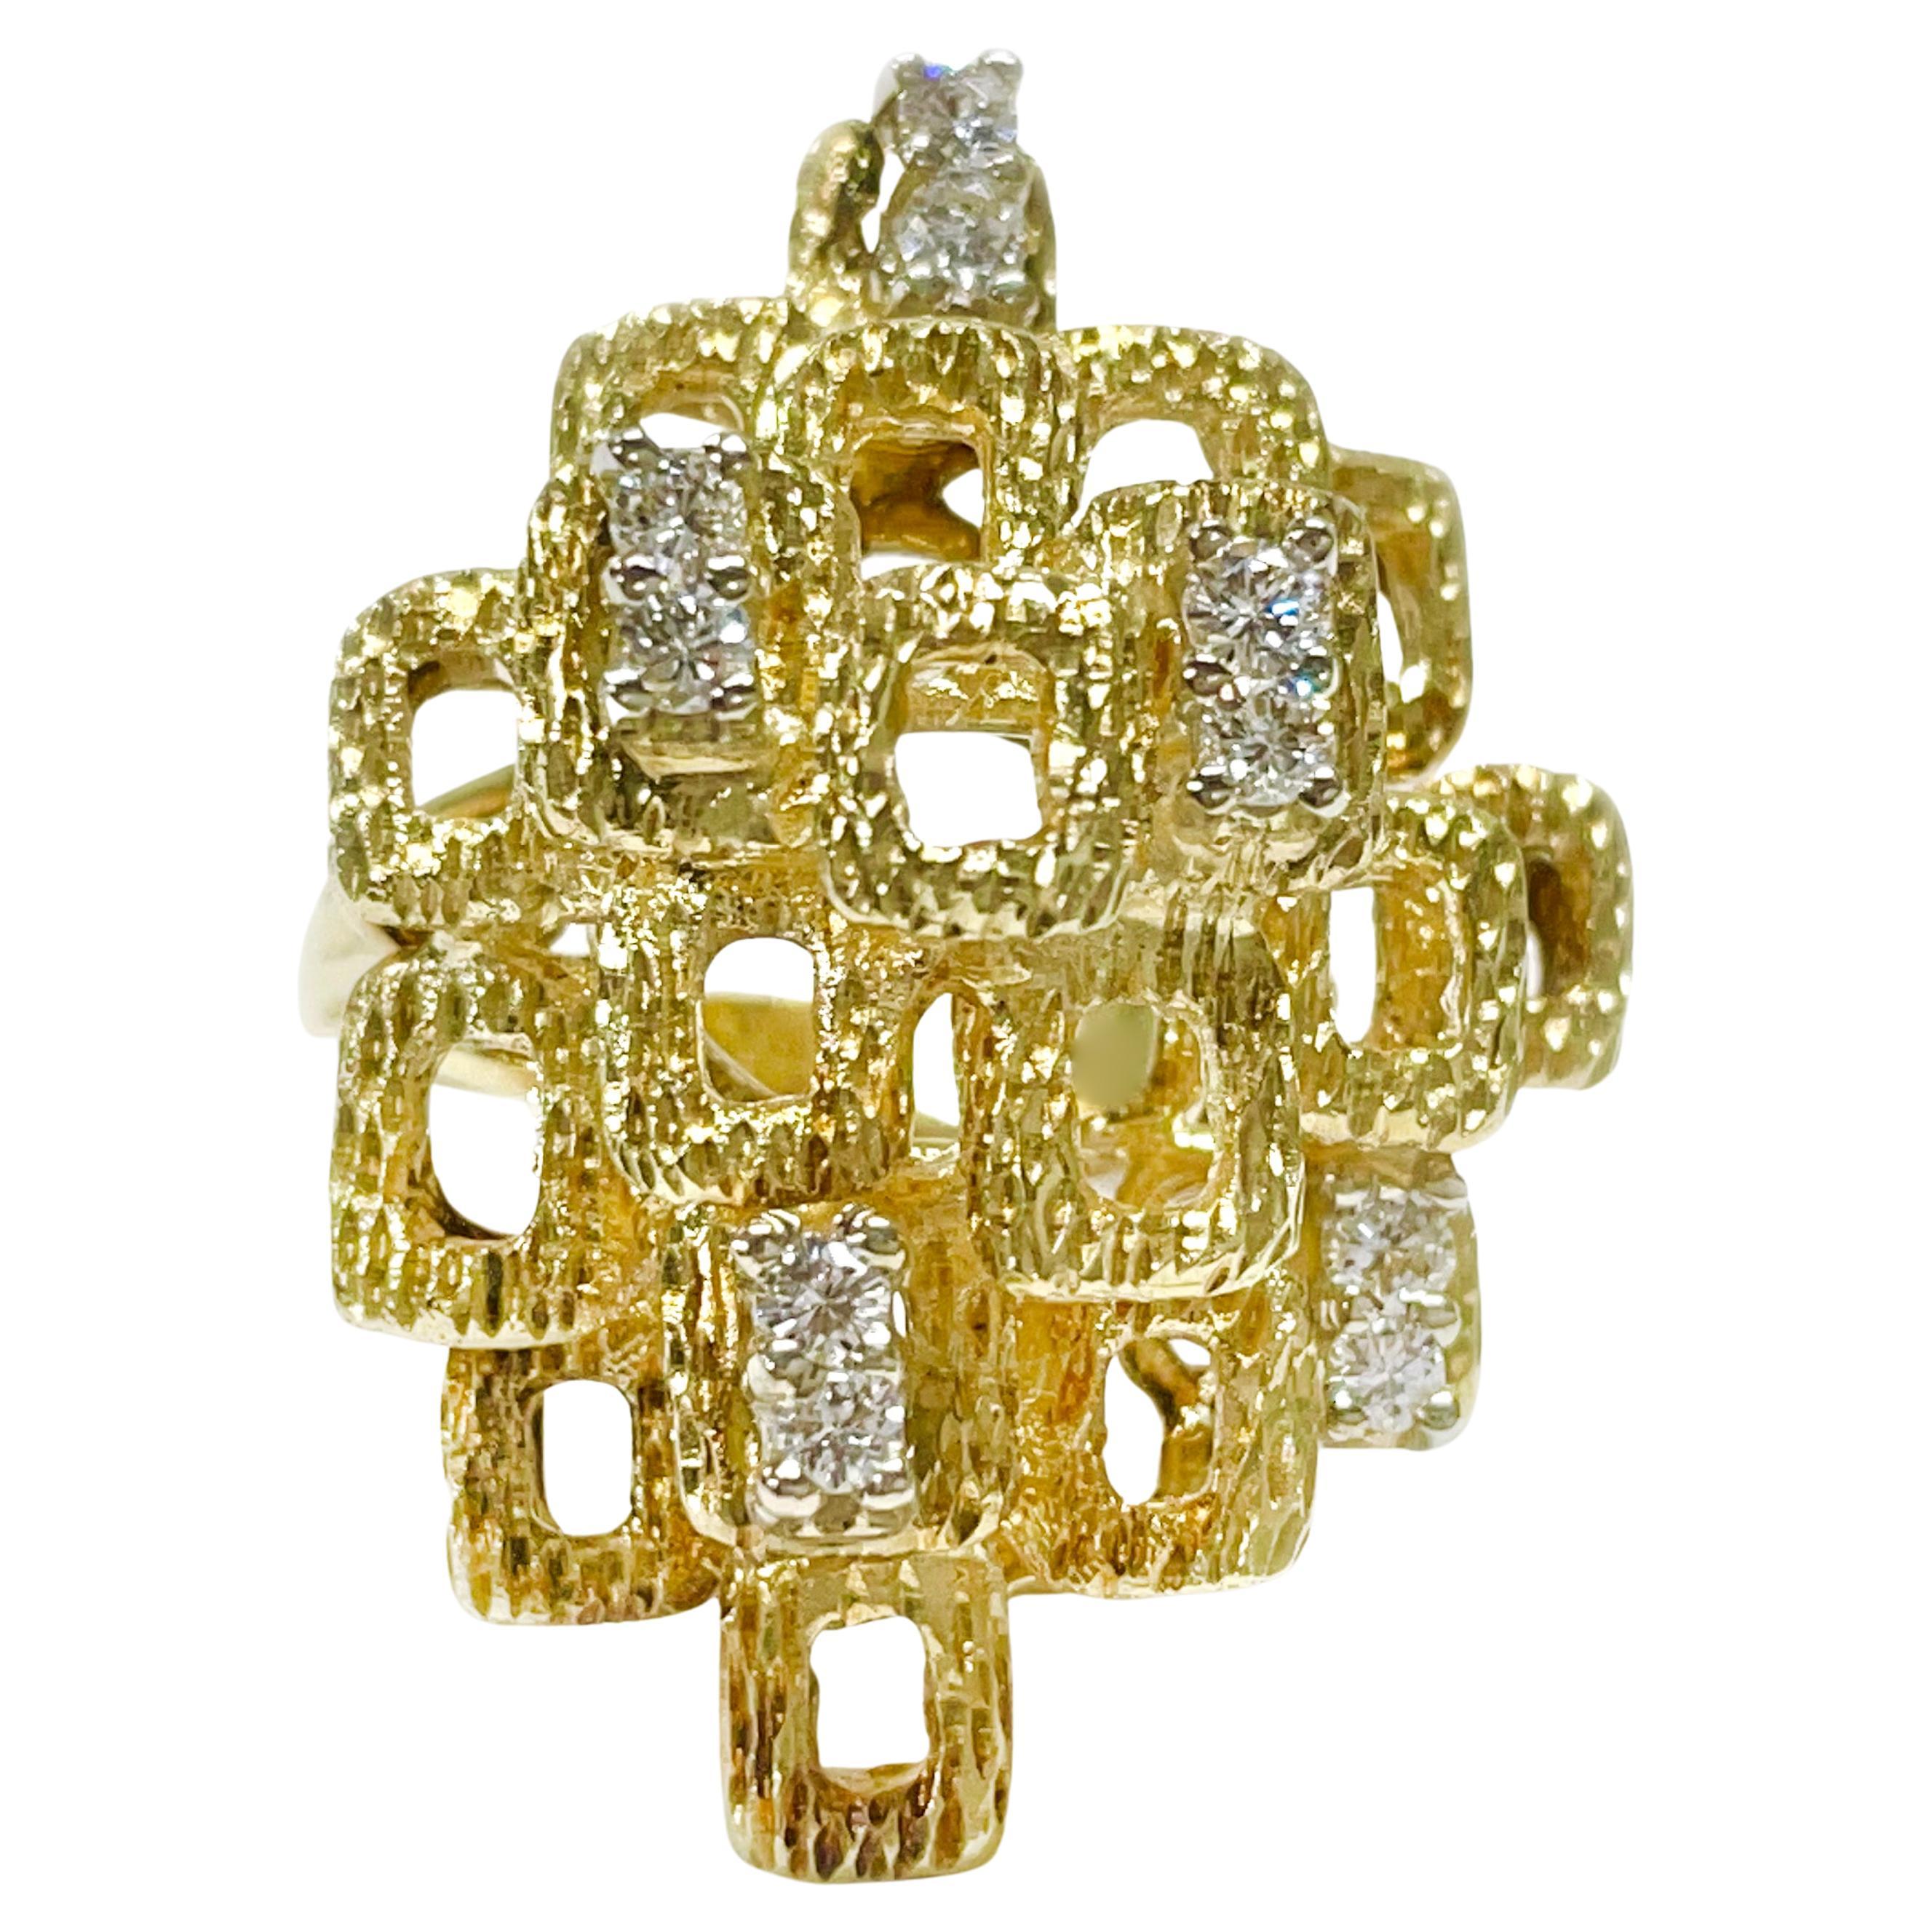 Yellow Textured Gold Diamond Ring, Circa 1980s For Sale